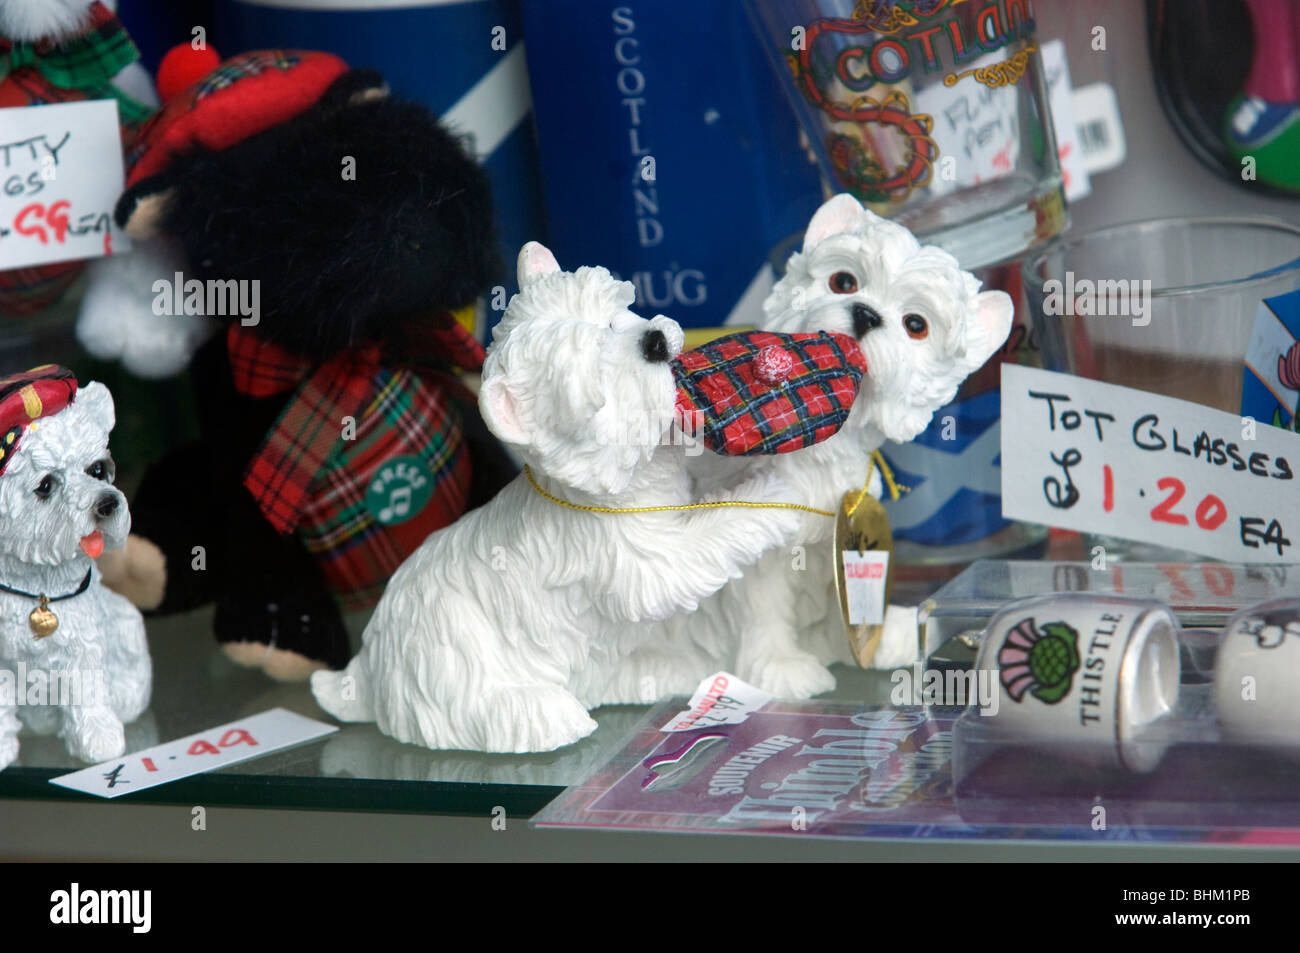 Scottish tourist novelties and souvenirs in the window display of a Helensburgh high street shop. Stock Photo